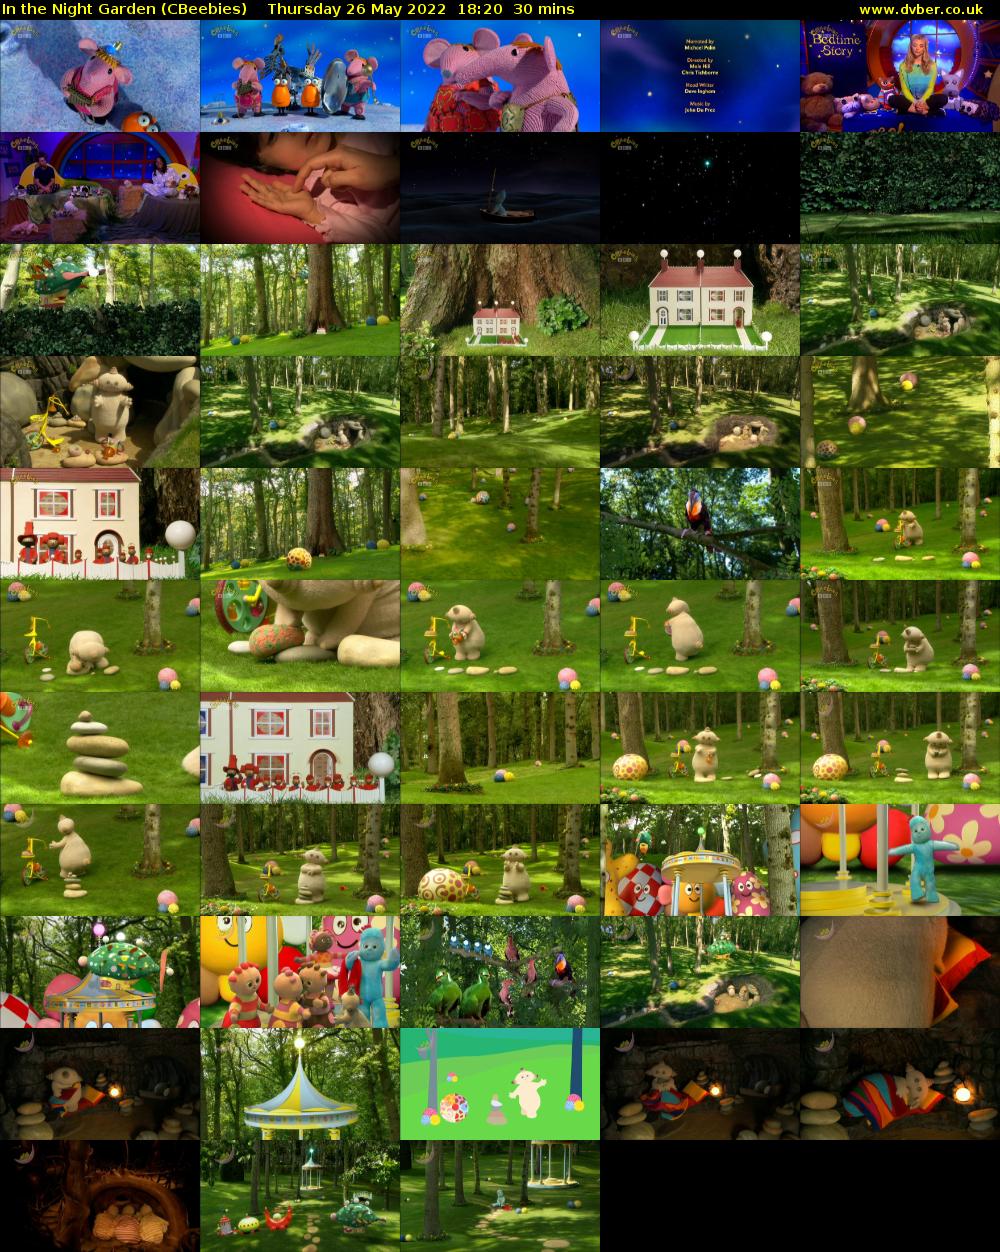 In the Night Garden (CBeebies) Thursday 26 May 2022 18:20 - 18:50